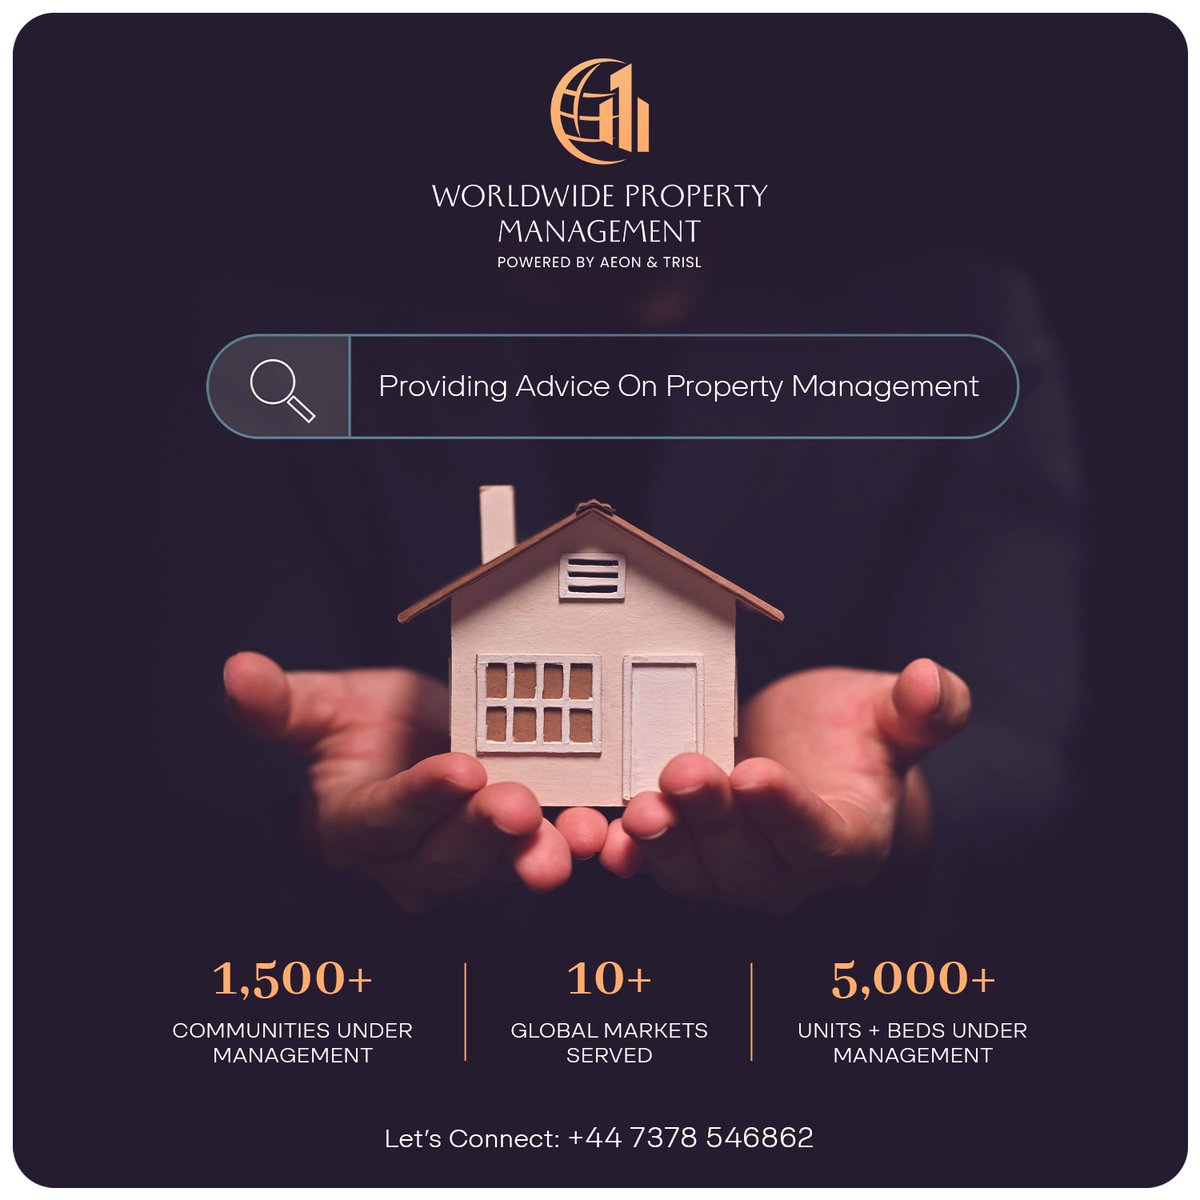 Elevate Your Investments and Maximize Returns with our expert Property Managers!

For Details:
+44 7378 546862

#WPM #worldwidepropertymanagement #worldwide #world #worldproperty #property #internationalproperty #management #Propertymanagement #propertymanager #manager #wedoit